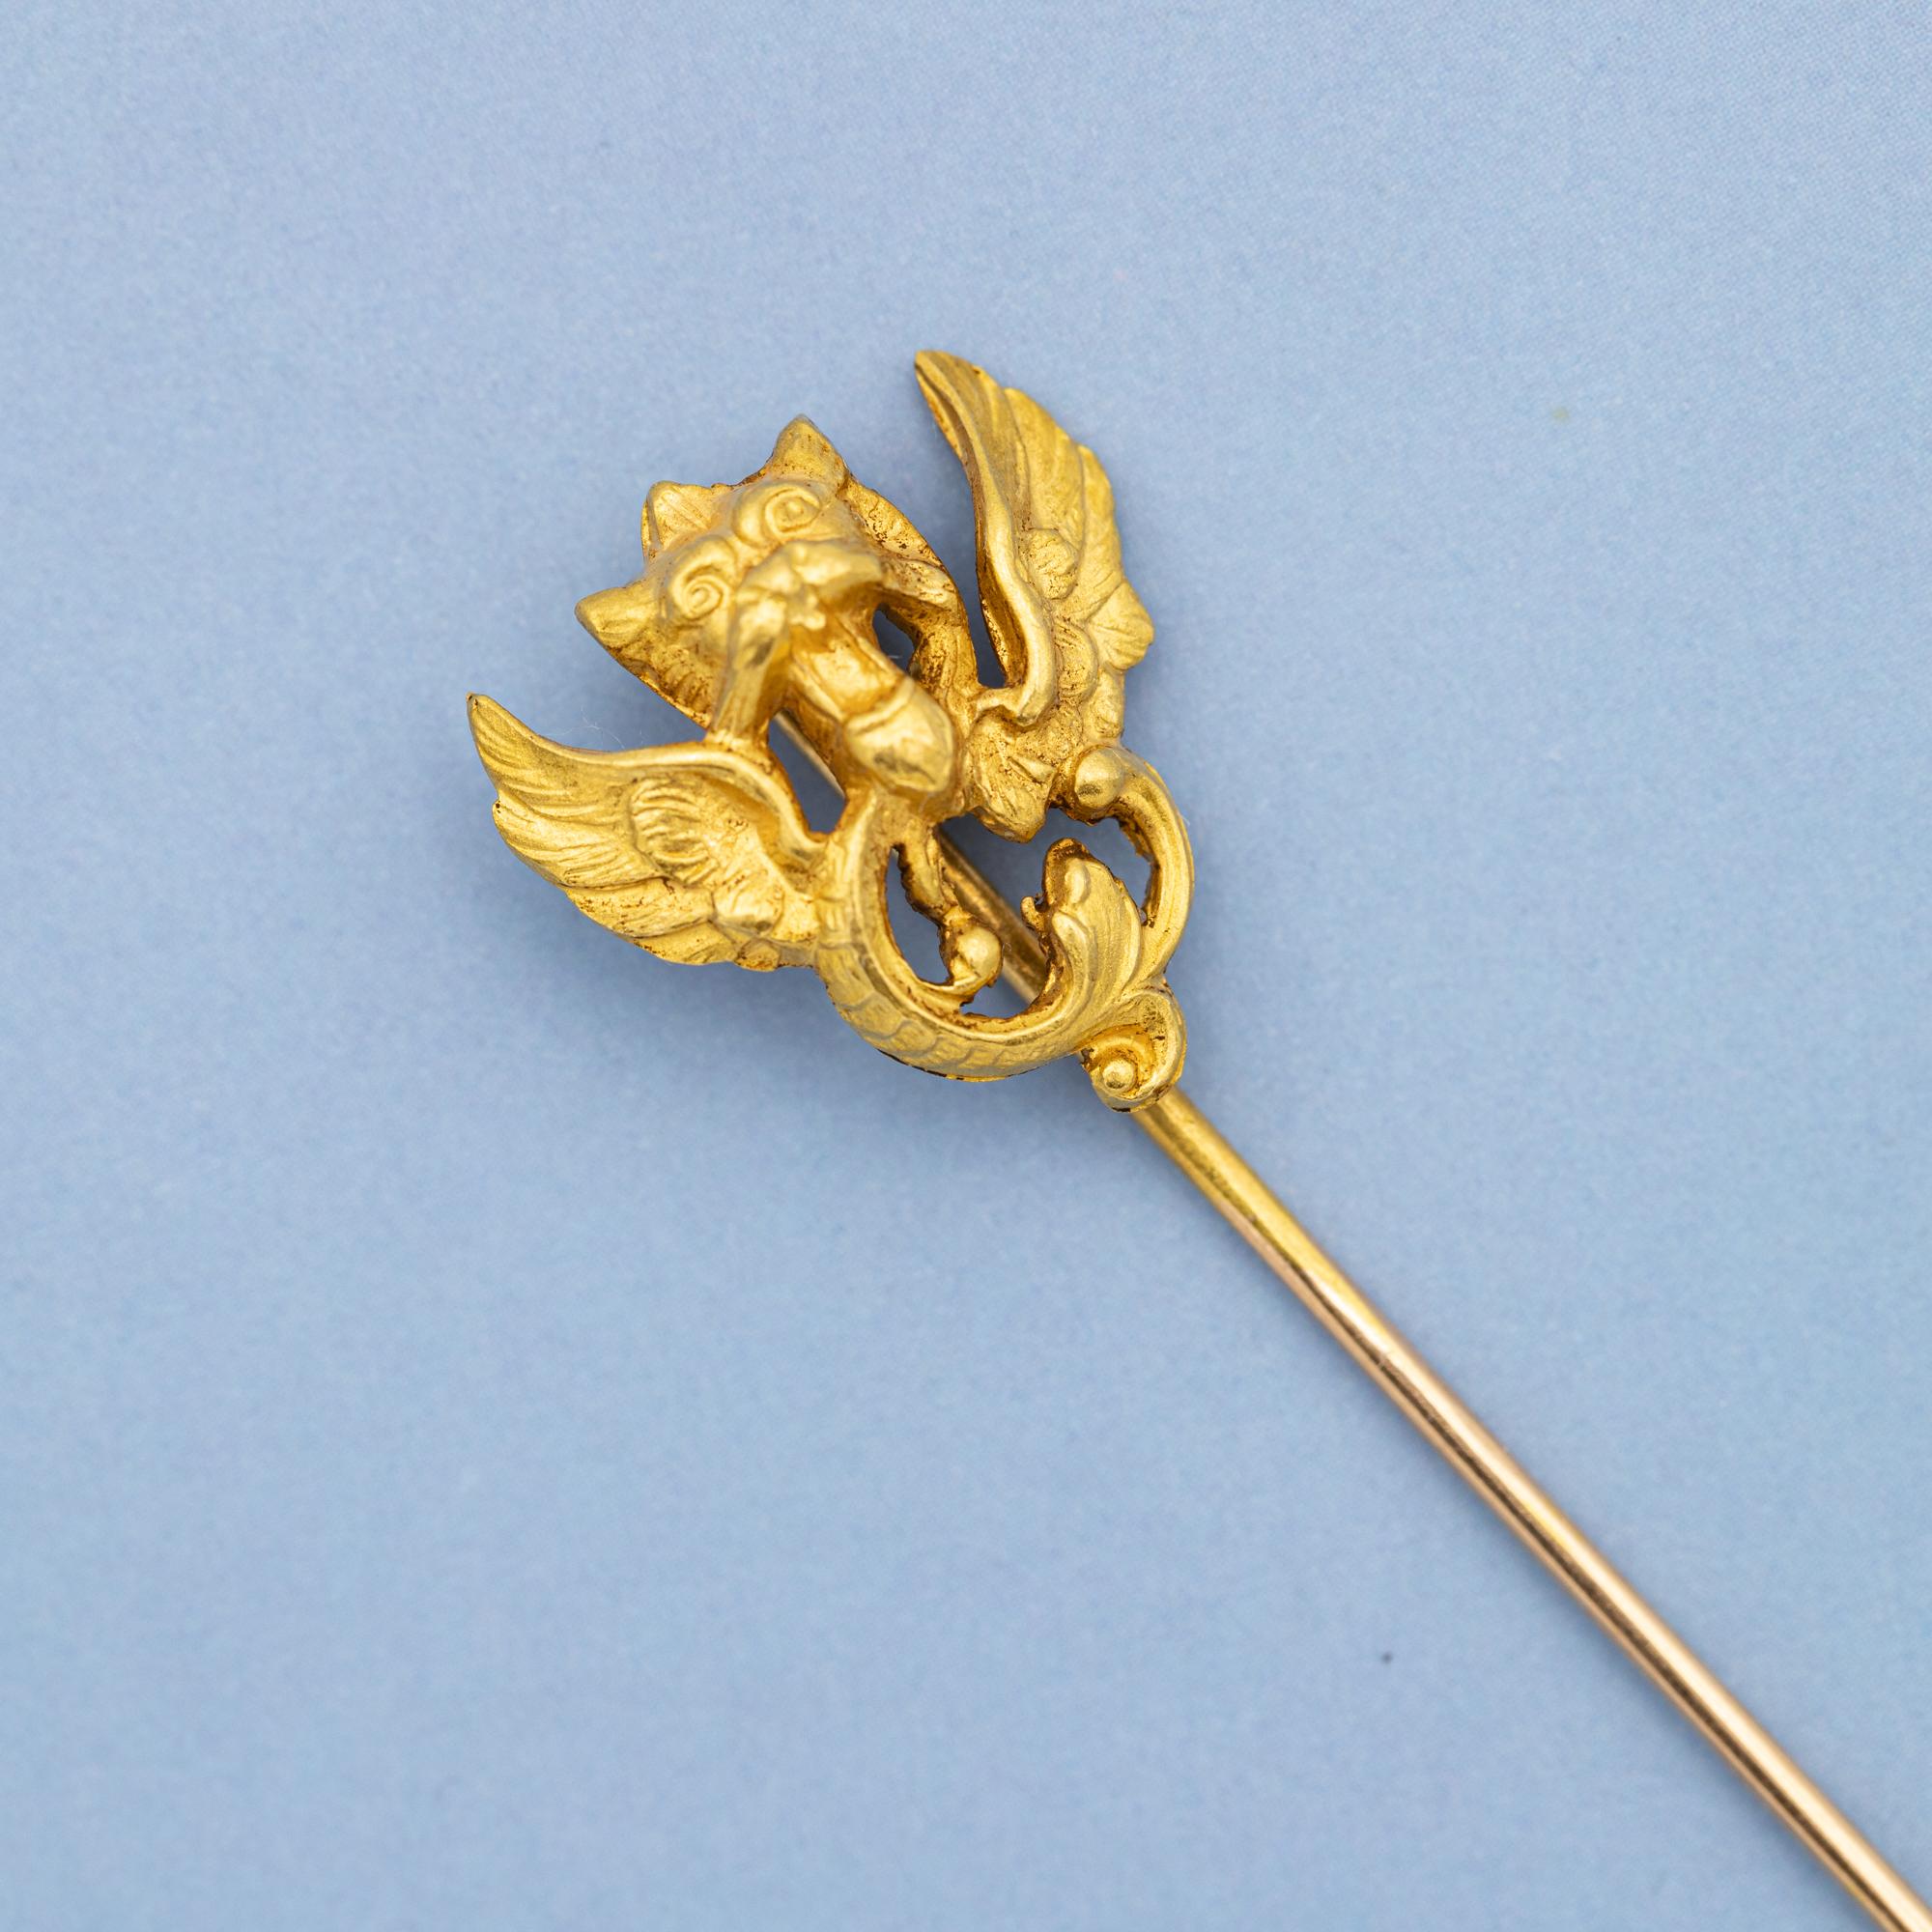 18k Yellow gold stick pin - Griffin brooch - Antique French Dragon cravat pin For Sale 1